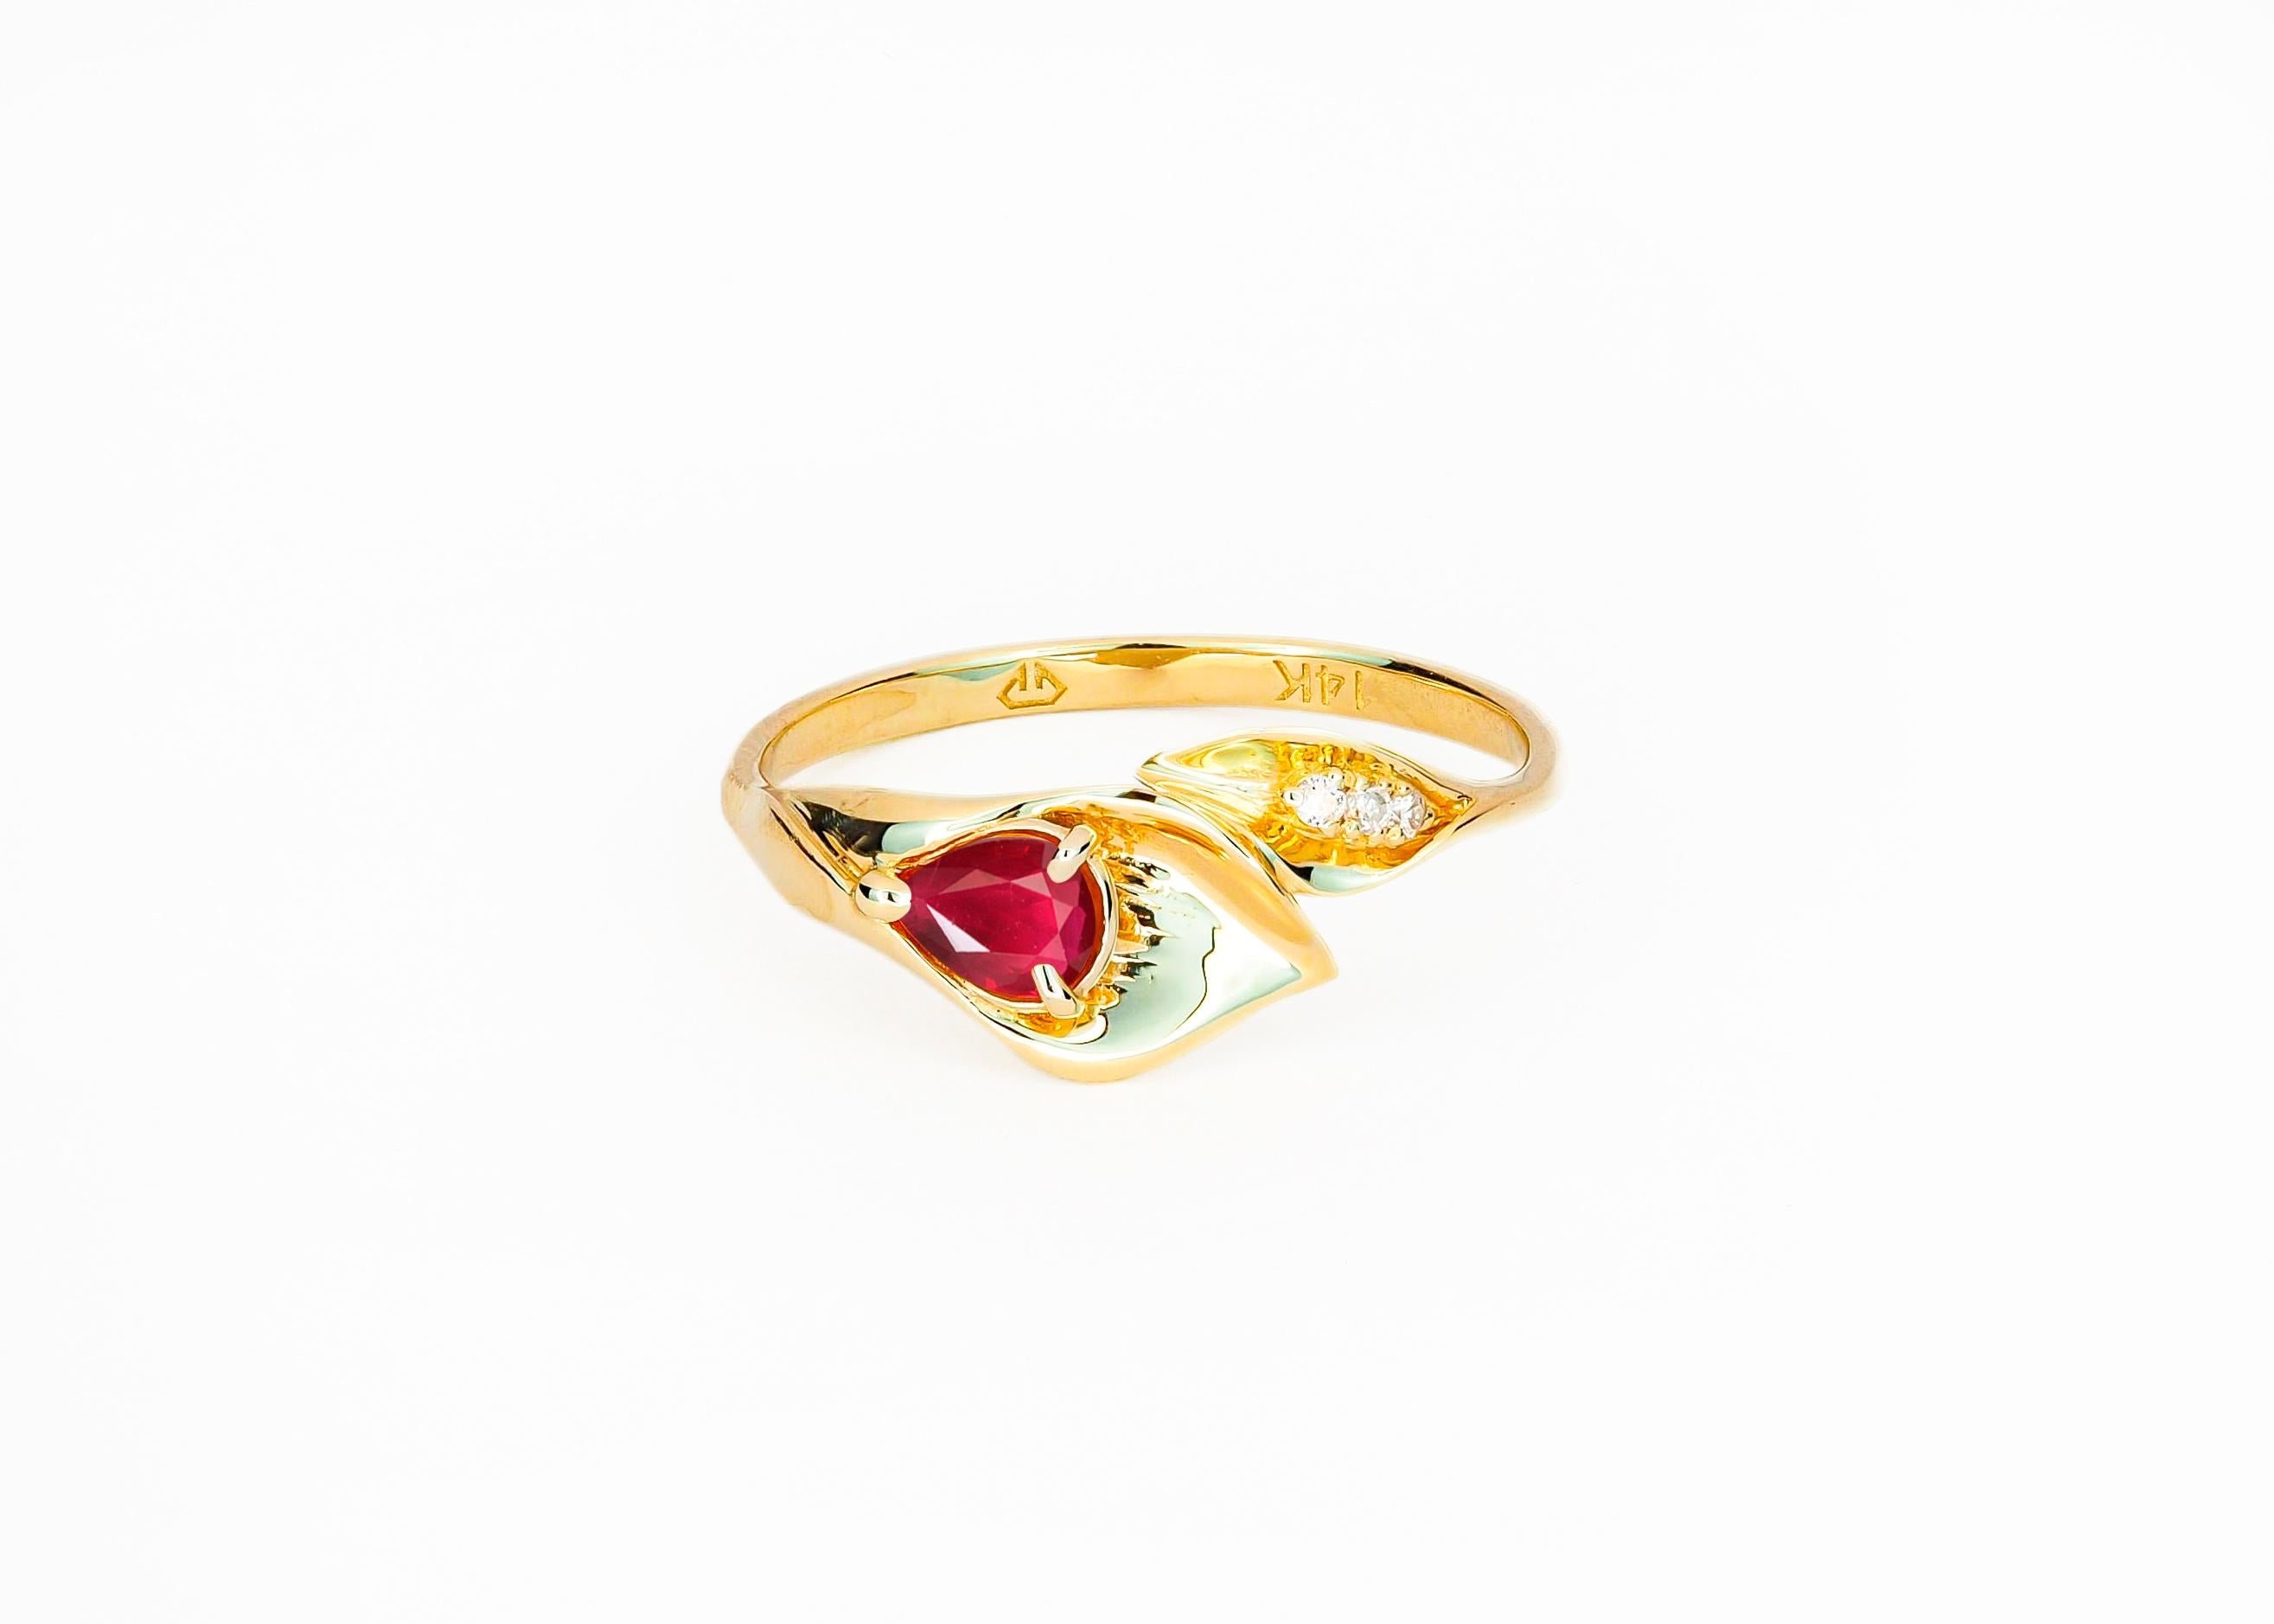 For Sale:  Lily Calla Gold Ring, 14 Karat Gold Ring with Ruby and Diamonds! 3